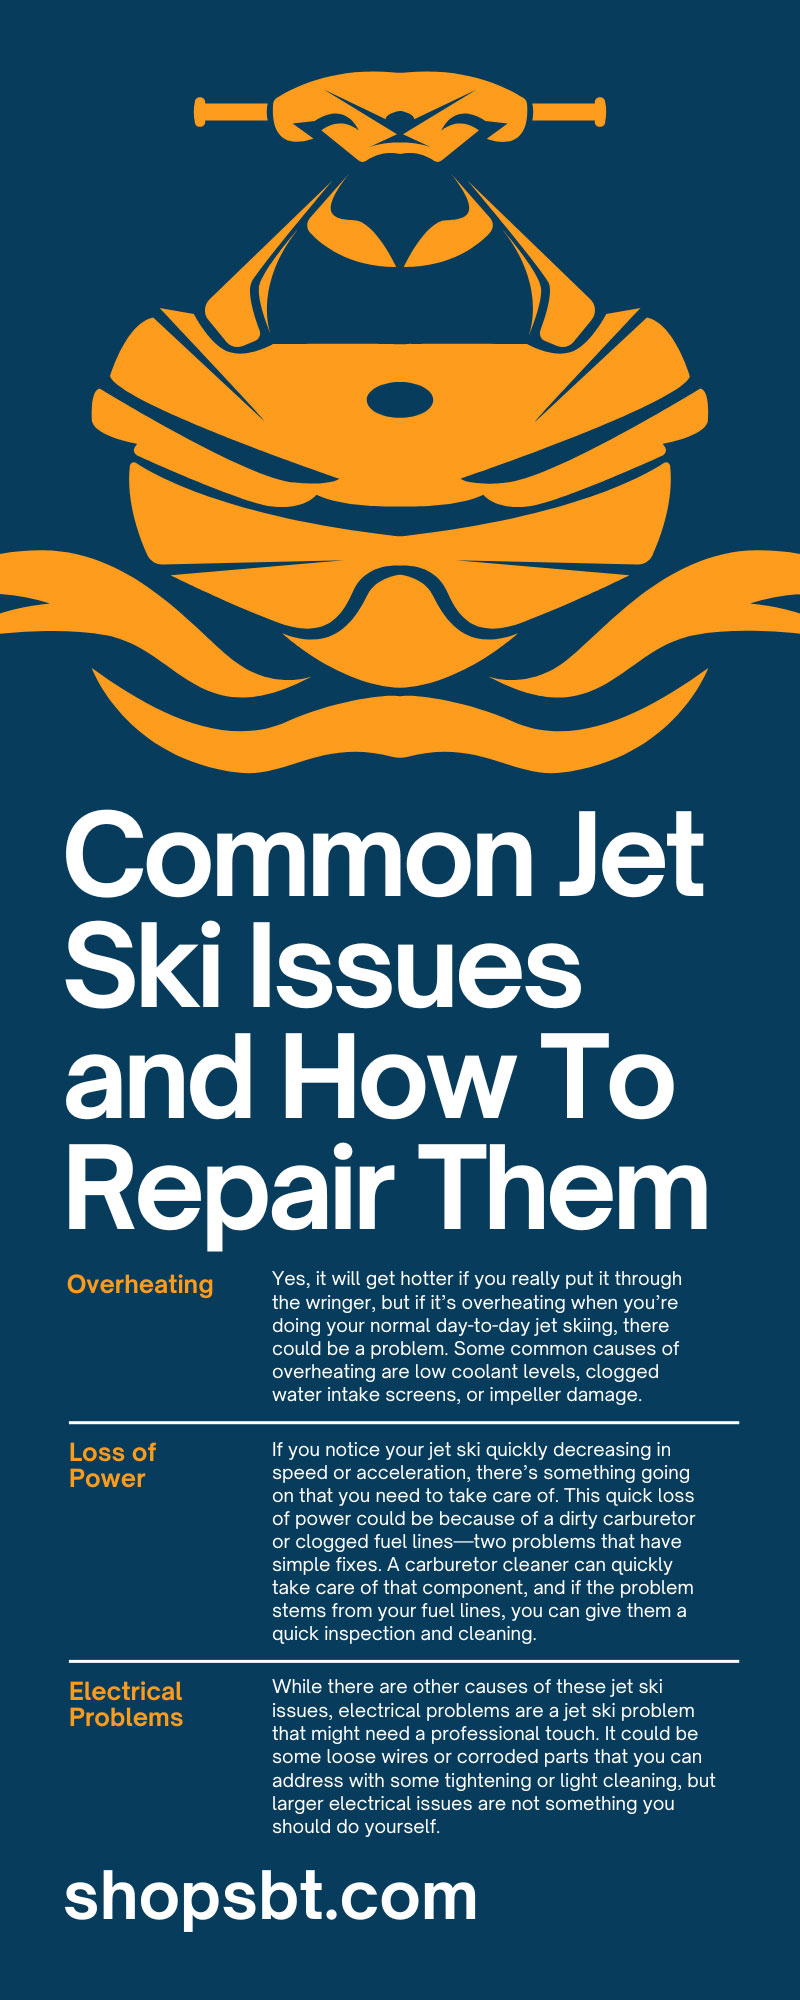 Common Jet Ski Issues and How To Repair Them